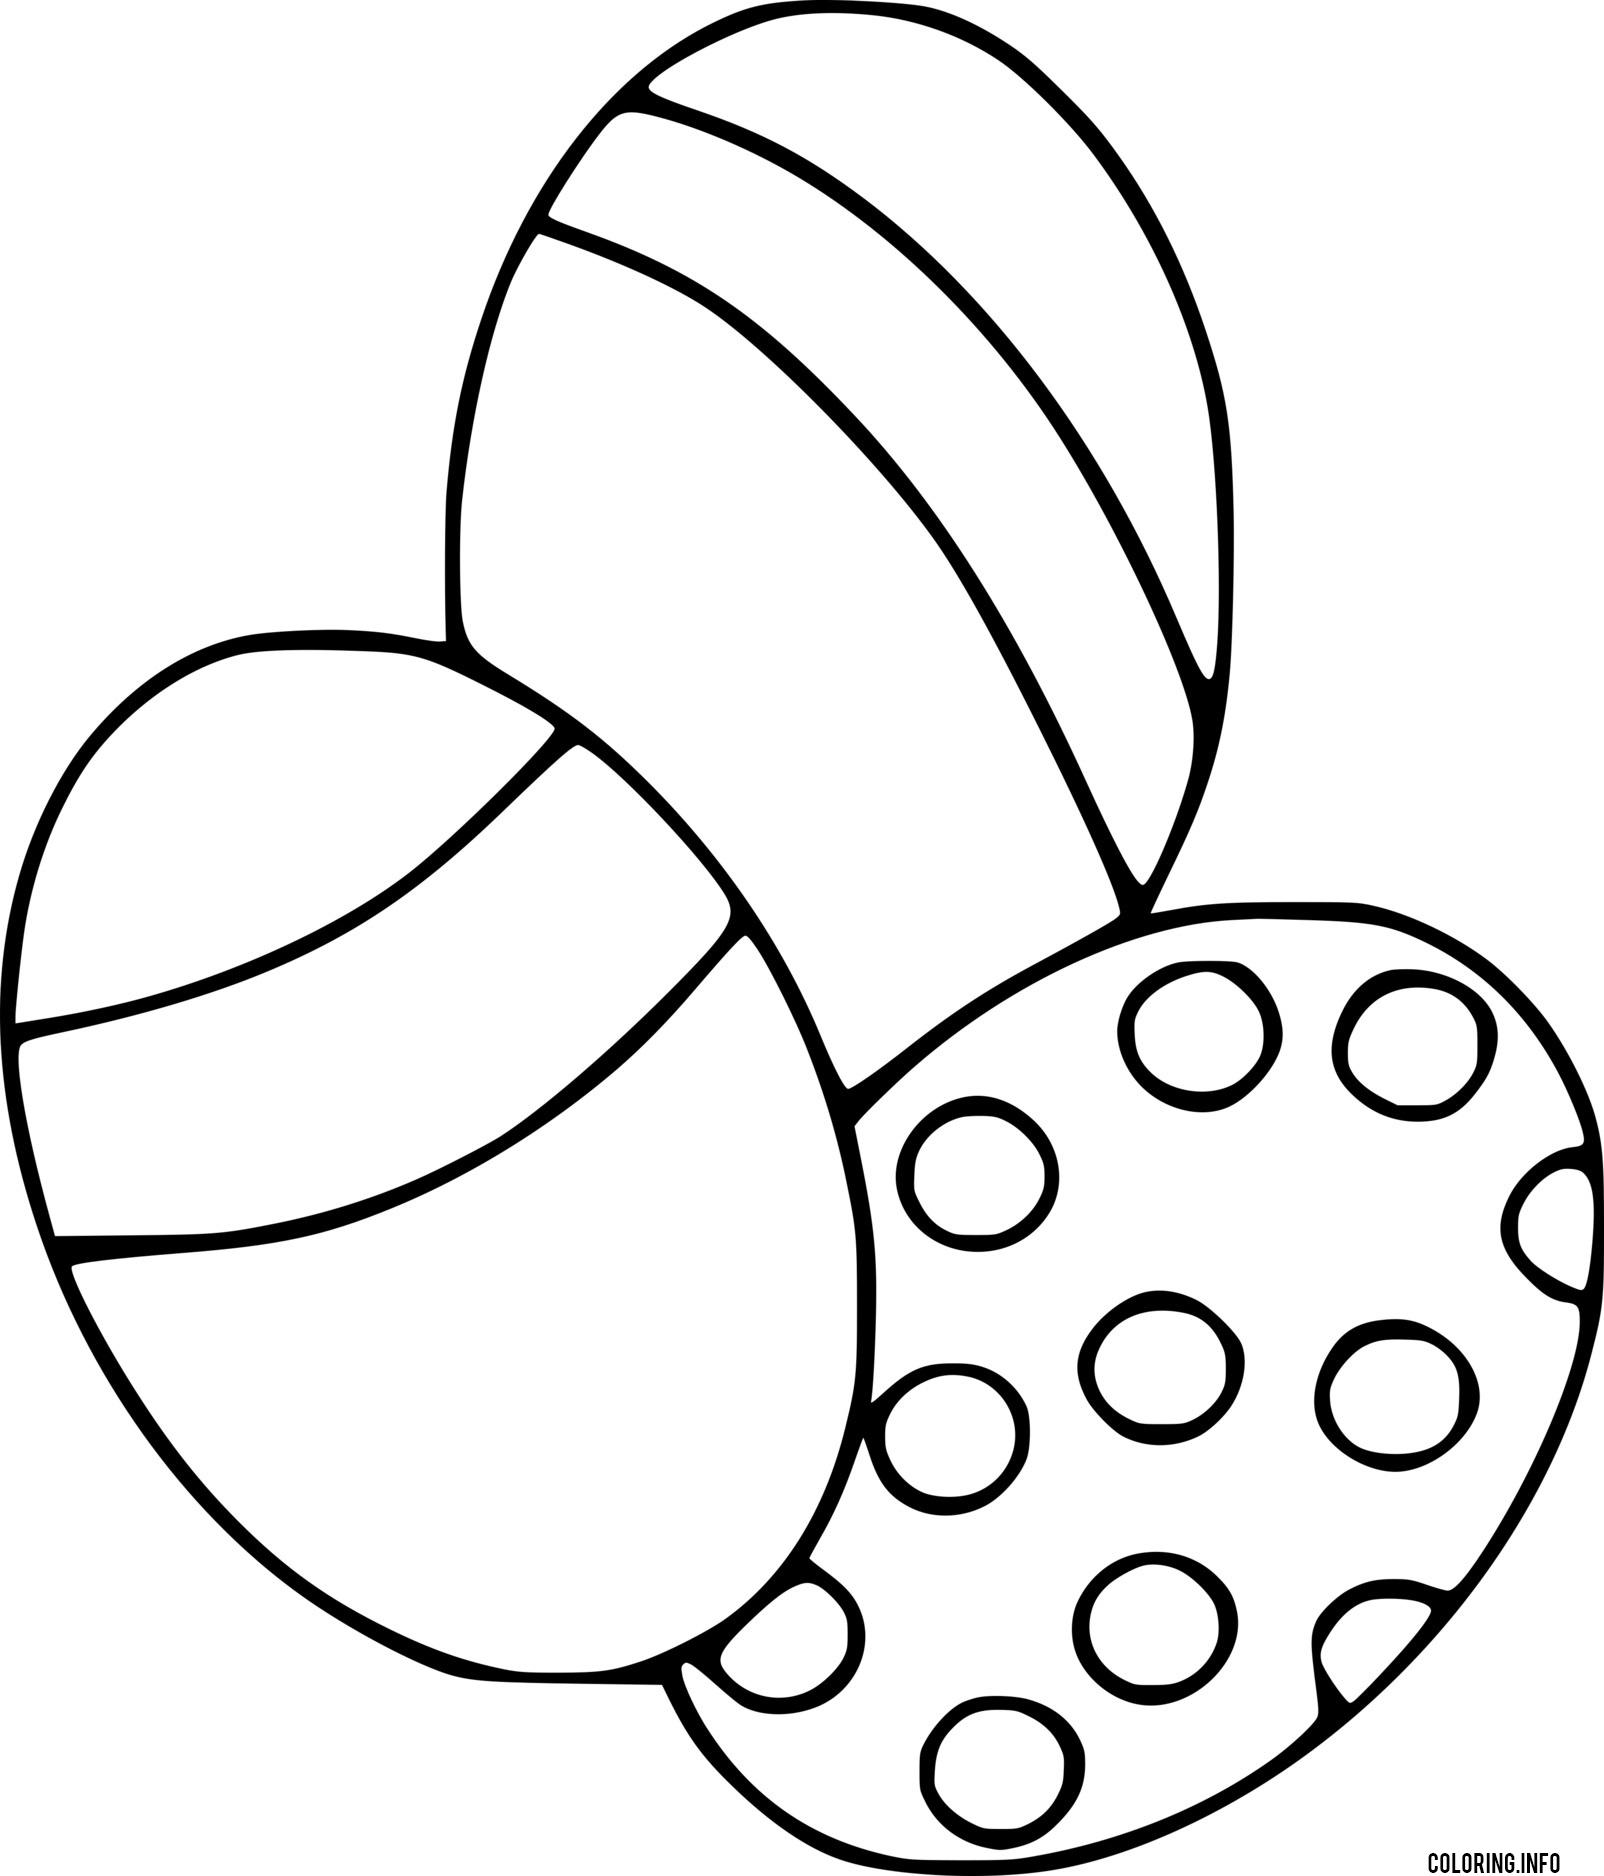 Three Simple Easter Eggs coloring